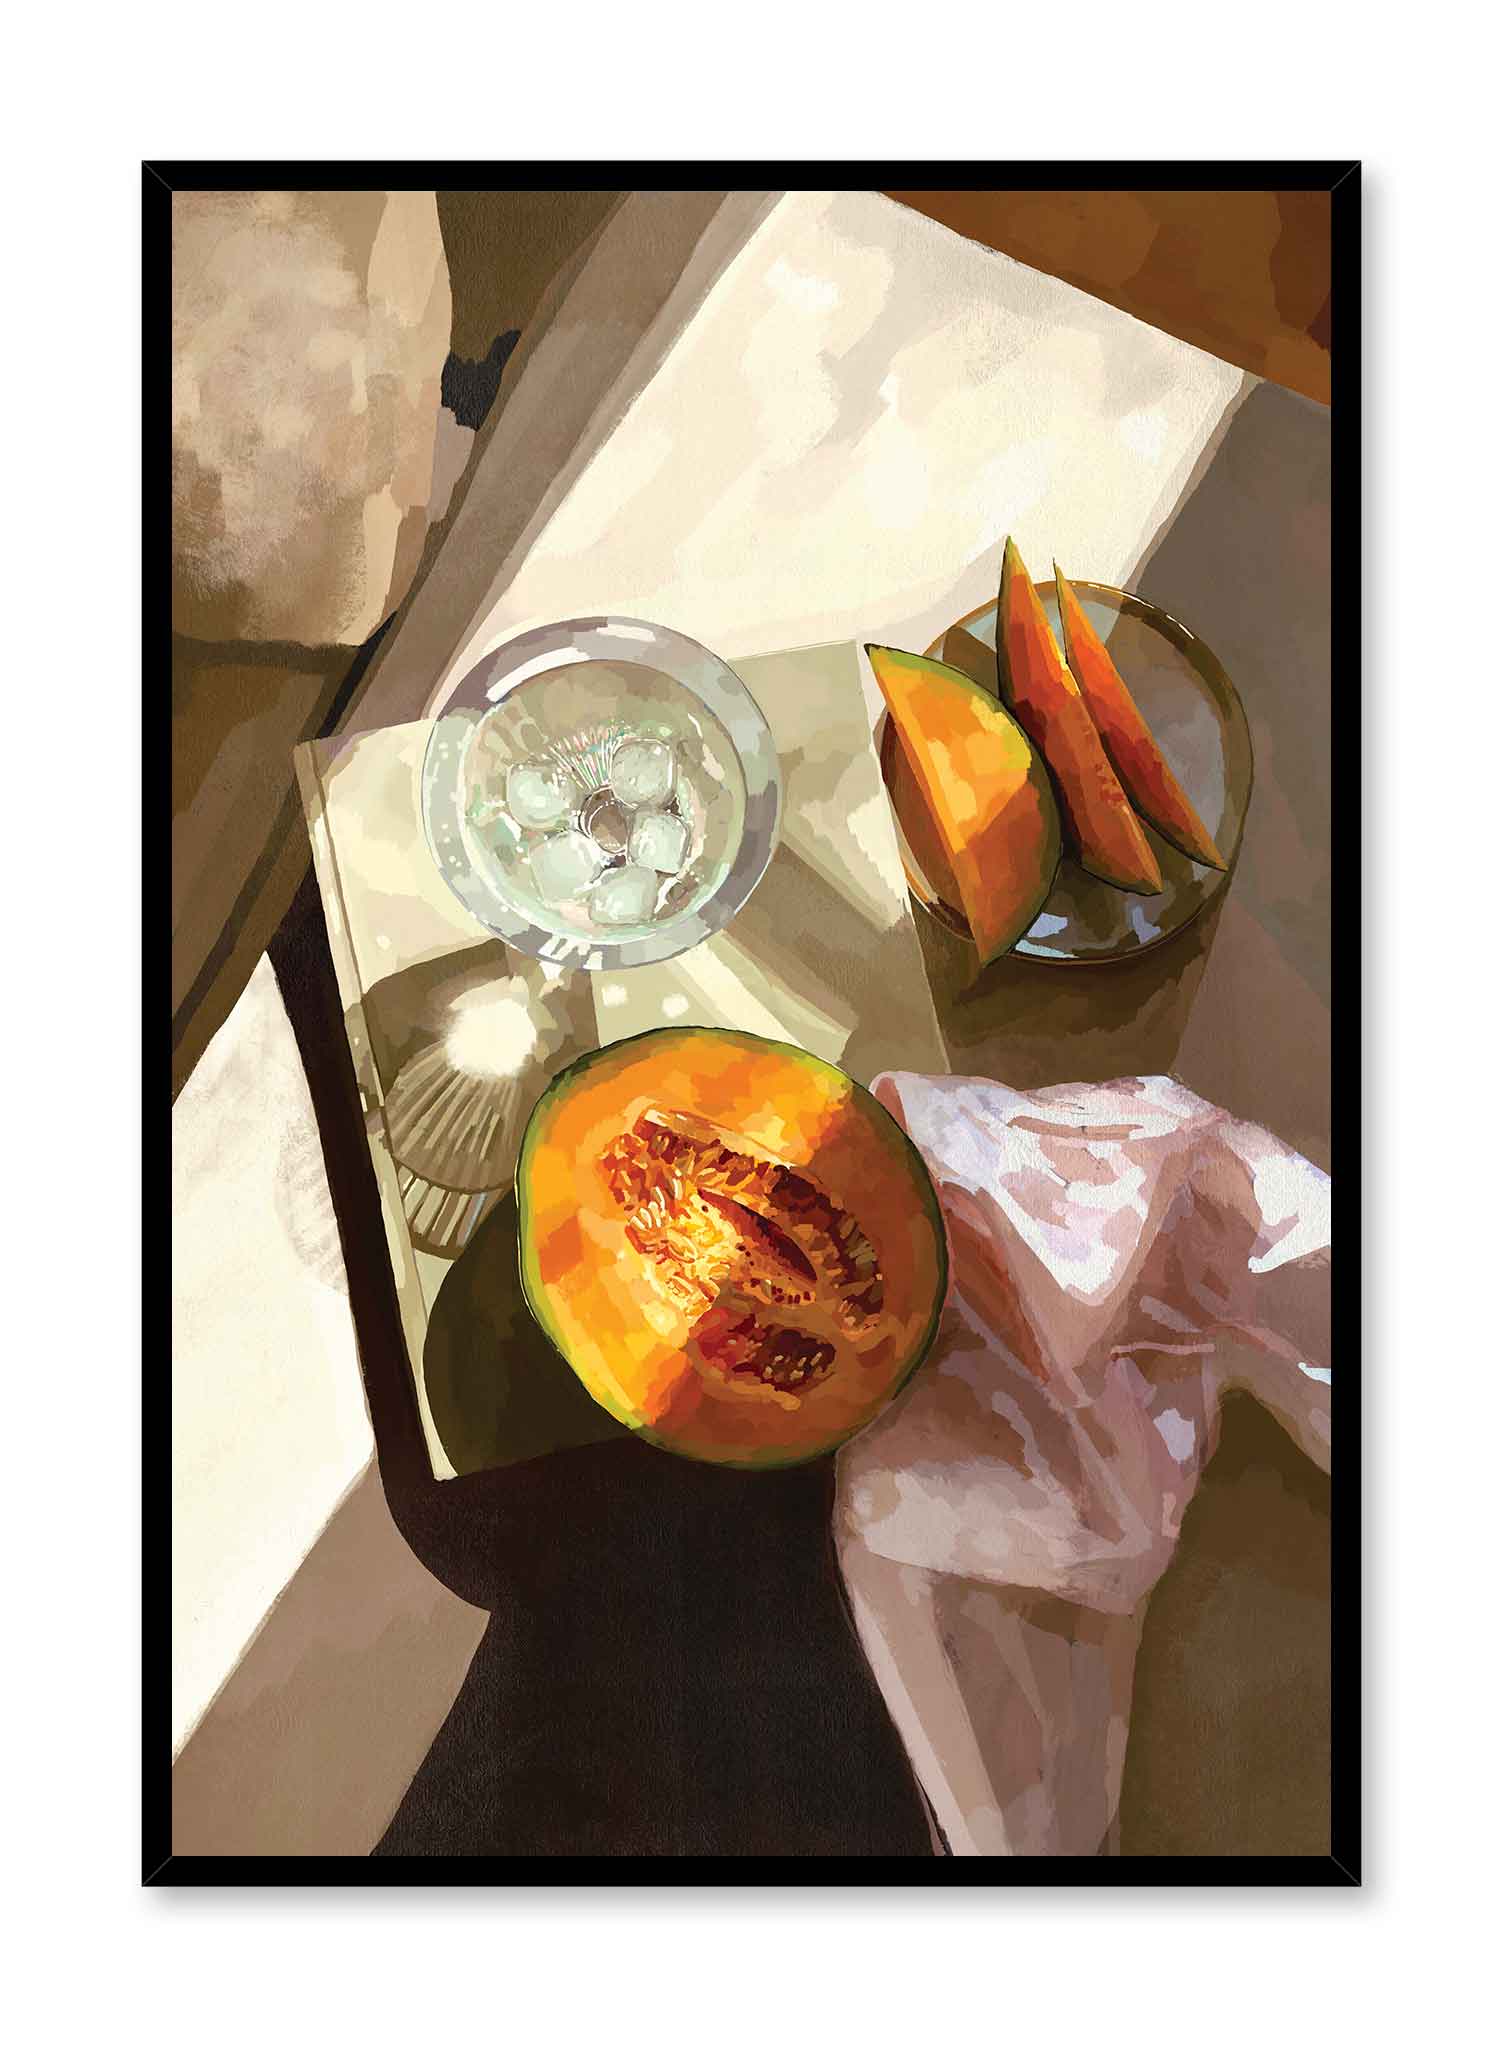 Sweet Cantaloupe is an illustration of a half-cut cantaloupe and a glass of ice water on top of a book by Audrey Rivet in collaboration with Opposite Wall.